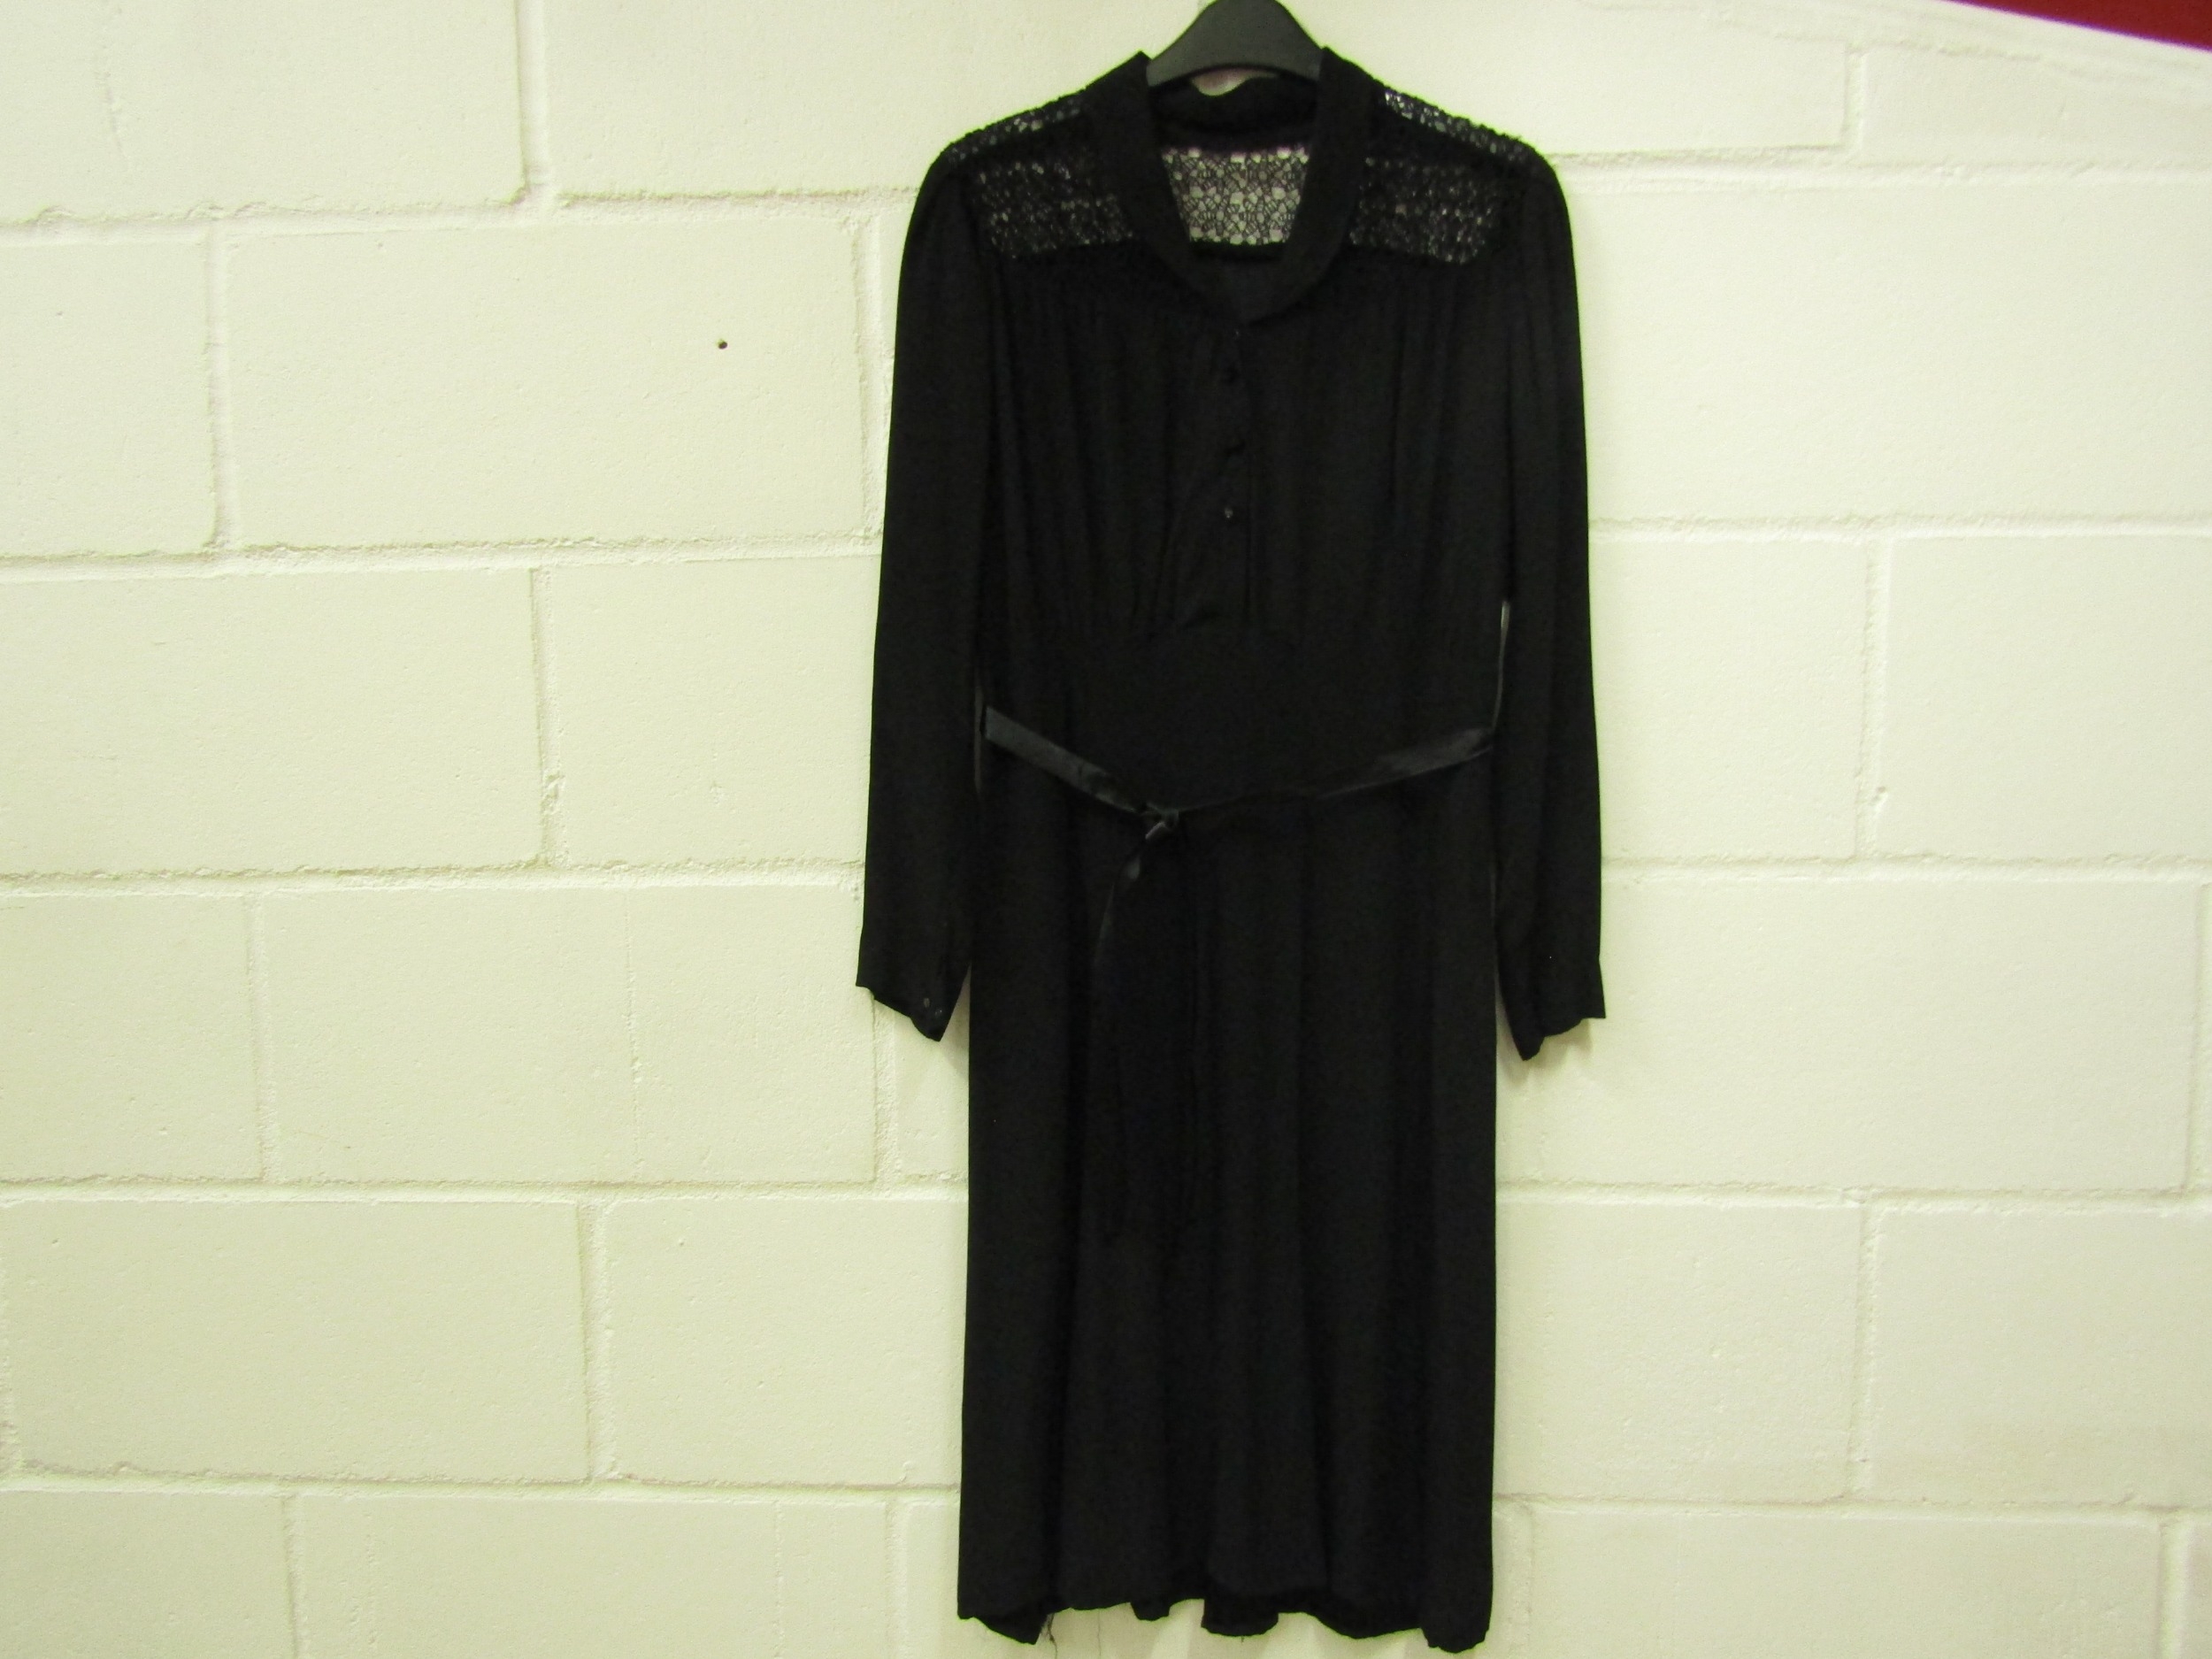 A 1940's silk crepe dress, the yoke has open lacework detail, with a popper front fastening with a